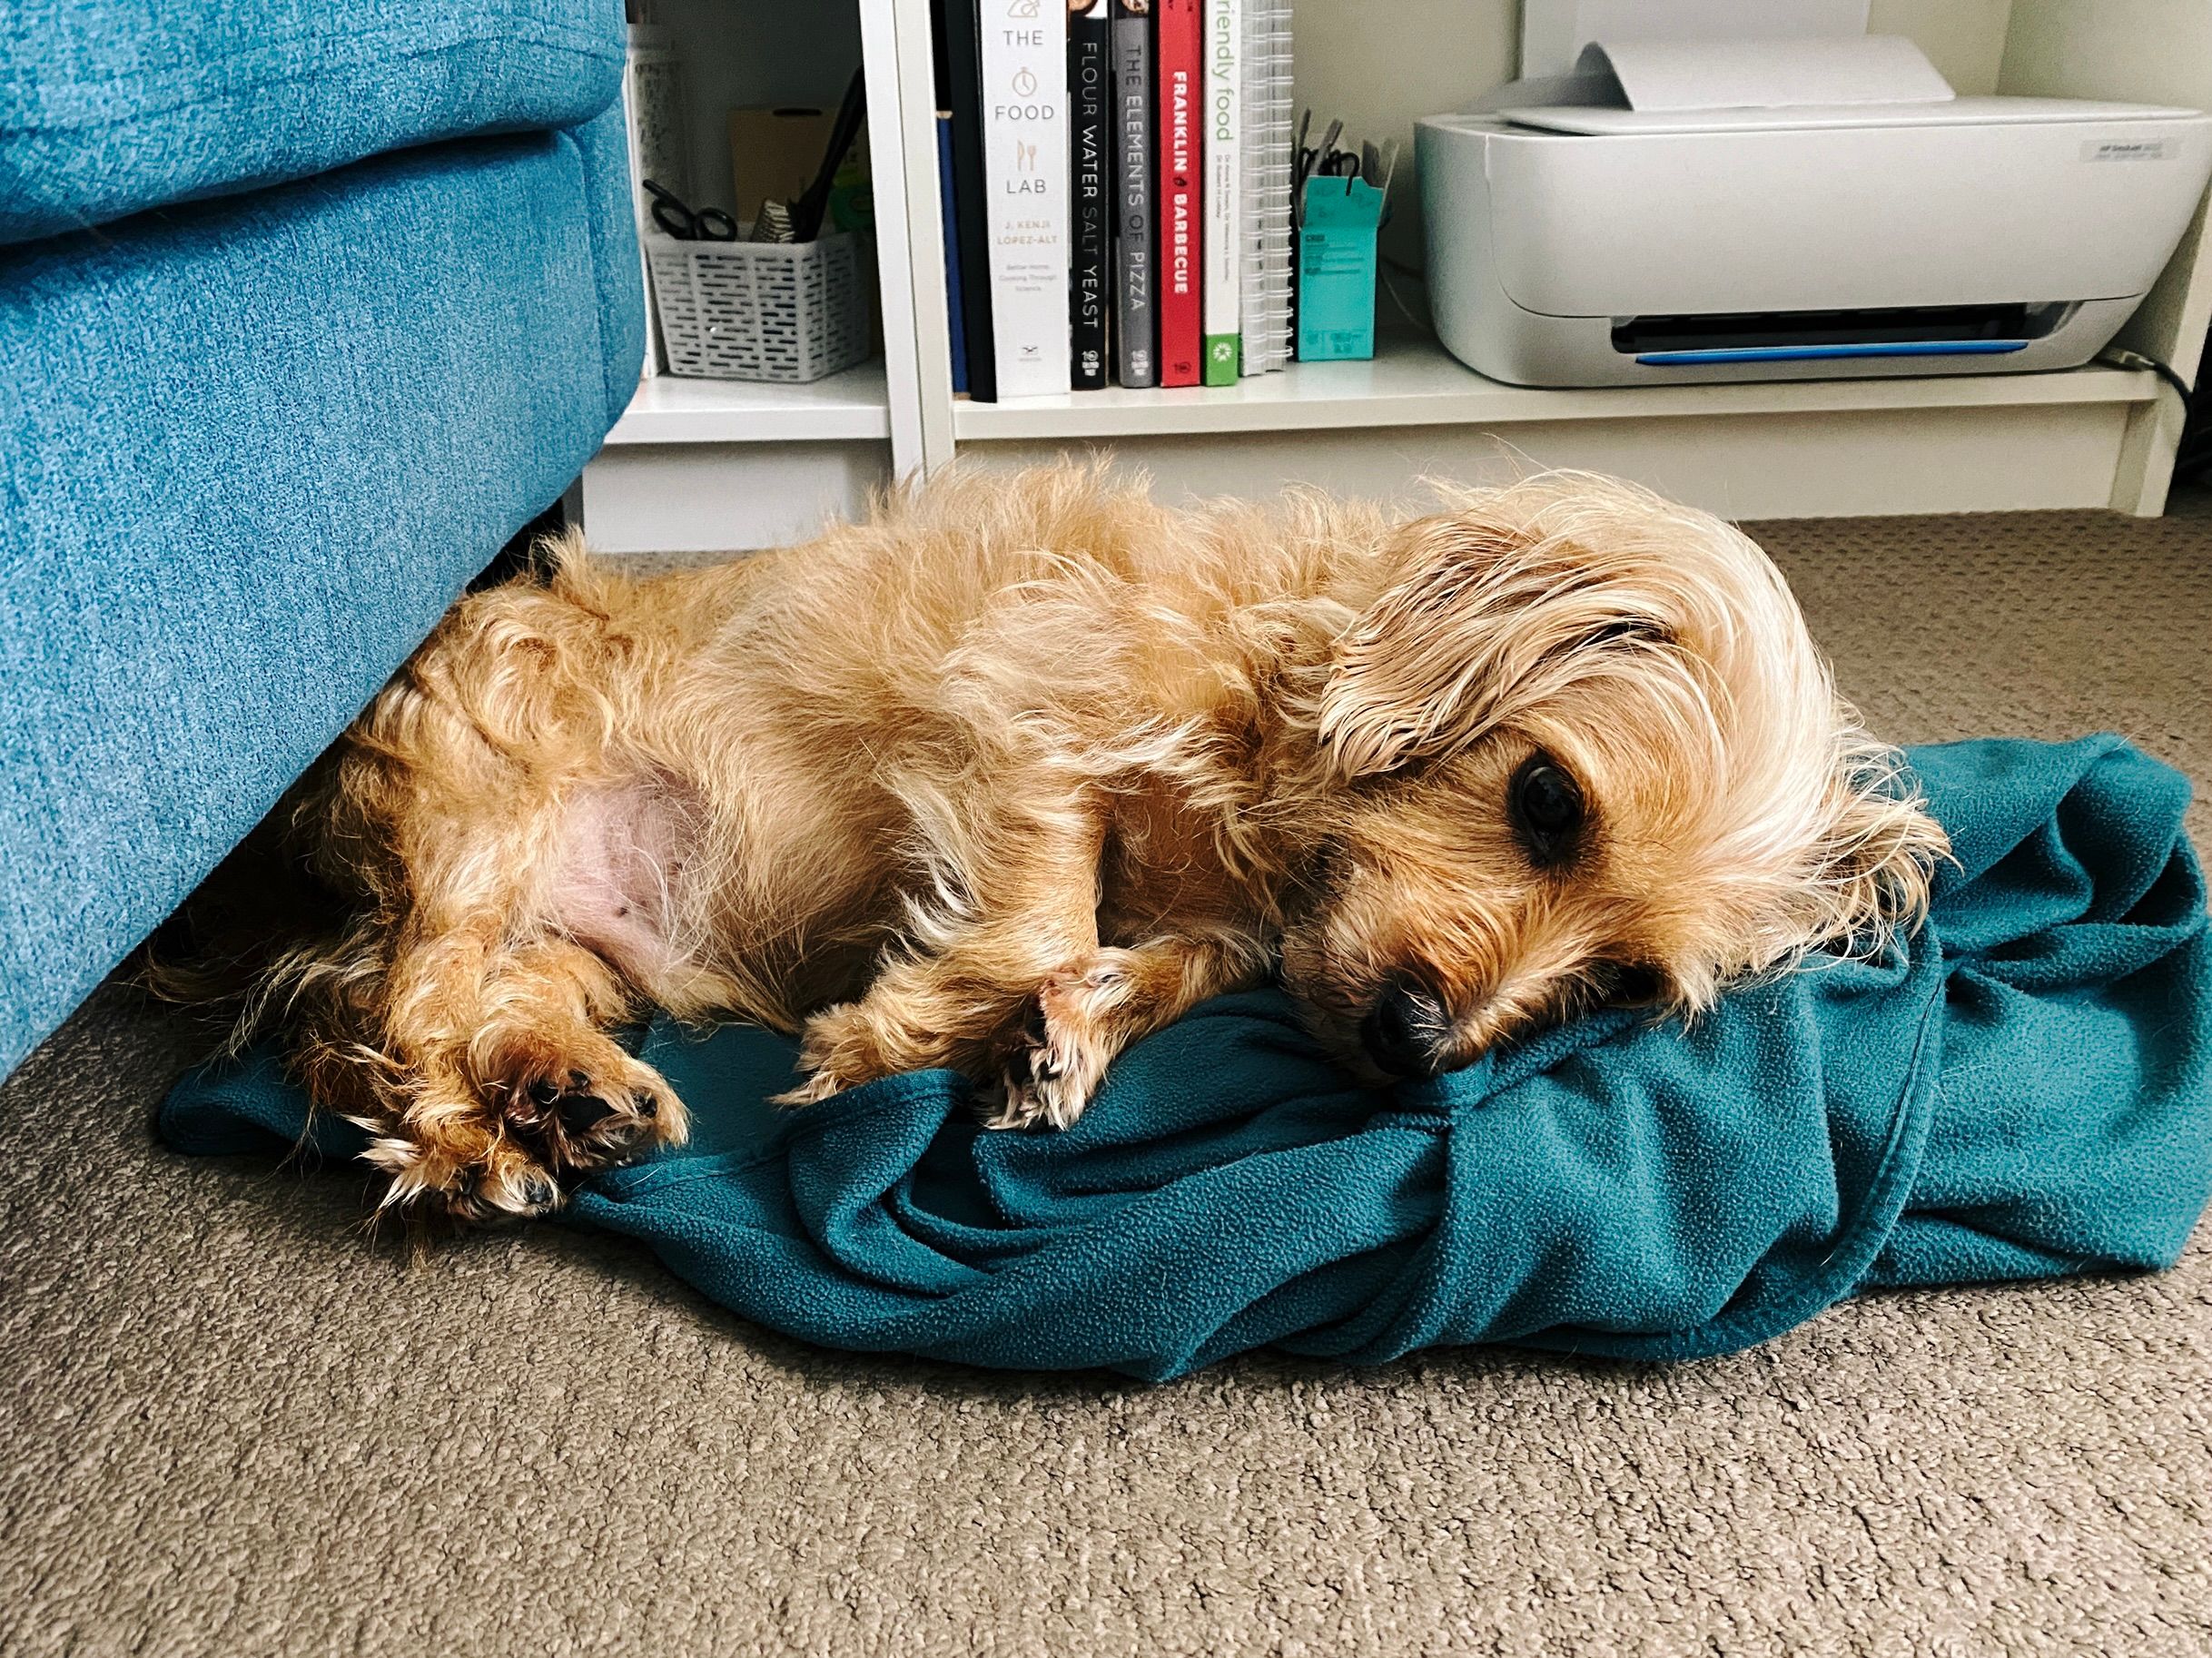 A photo of a small scruffy blonde dog lying partially curled up on his side on a blue/green blanket.